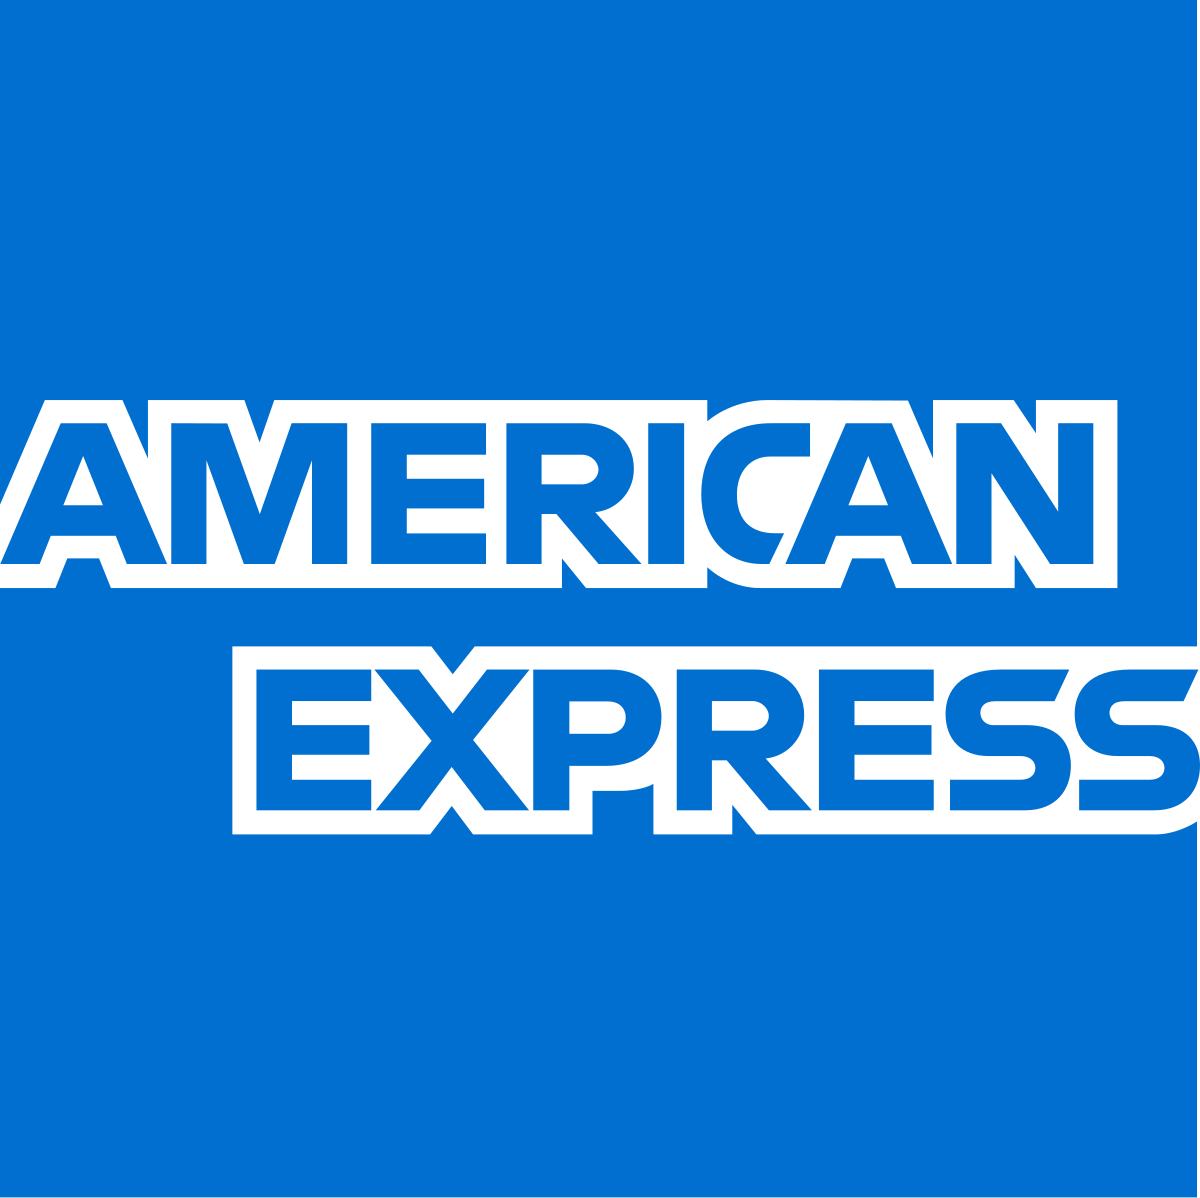 Comment contacter American Express service client ?